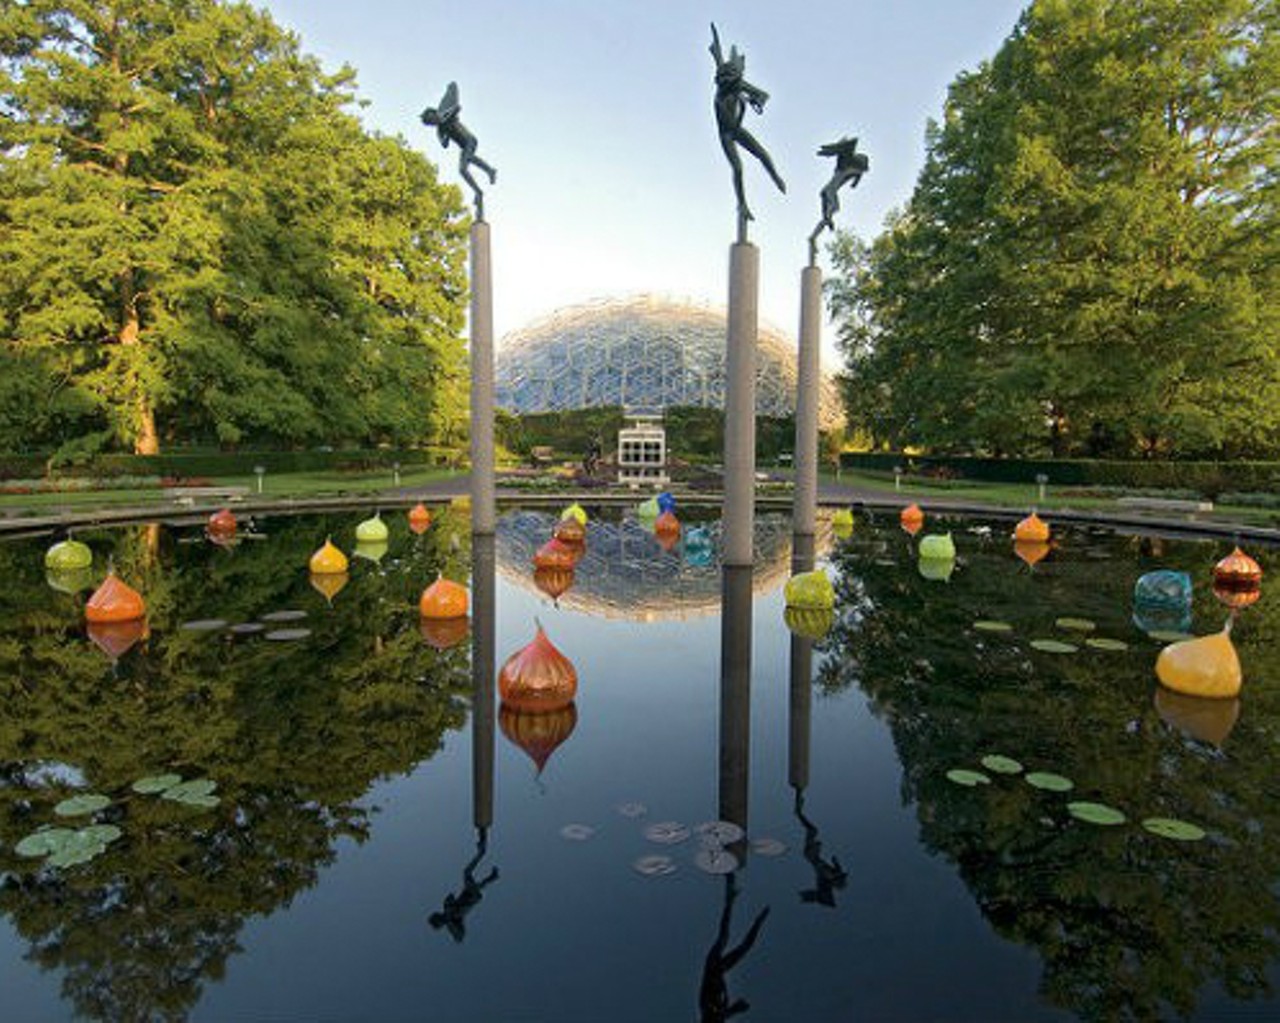 Shaw's Garden
We natives always call the Missouri Botanical Garden "Shaw's Garden" after its founder, Henry Shaw. Apparently we're all really tight with the noted philanthropist because we say Shaw's Garden like we know the dude and it's just his back yard.
Photo courtesy of Missouri Botanical Garden